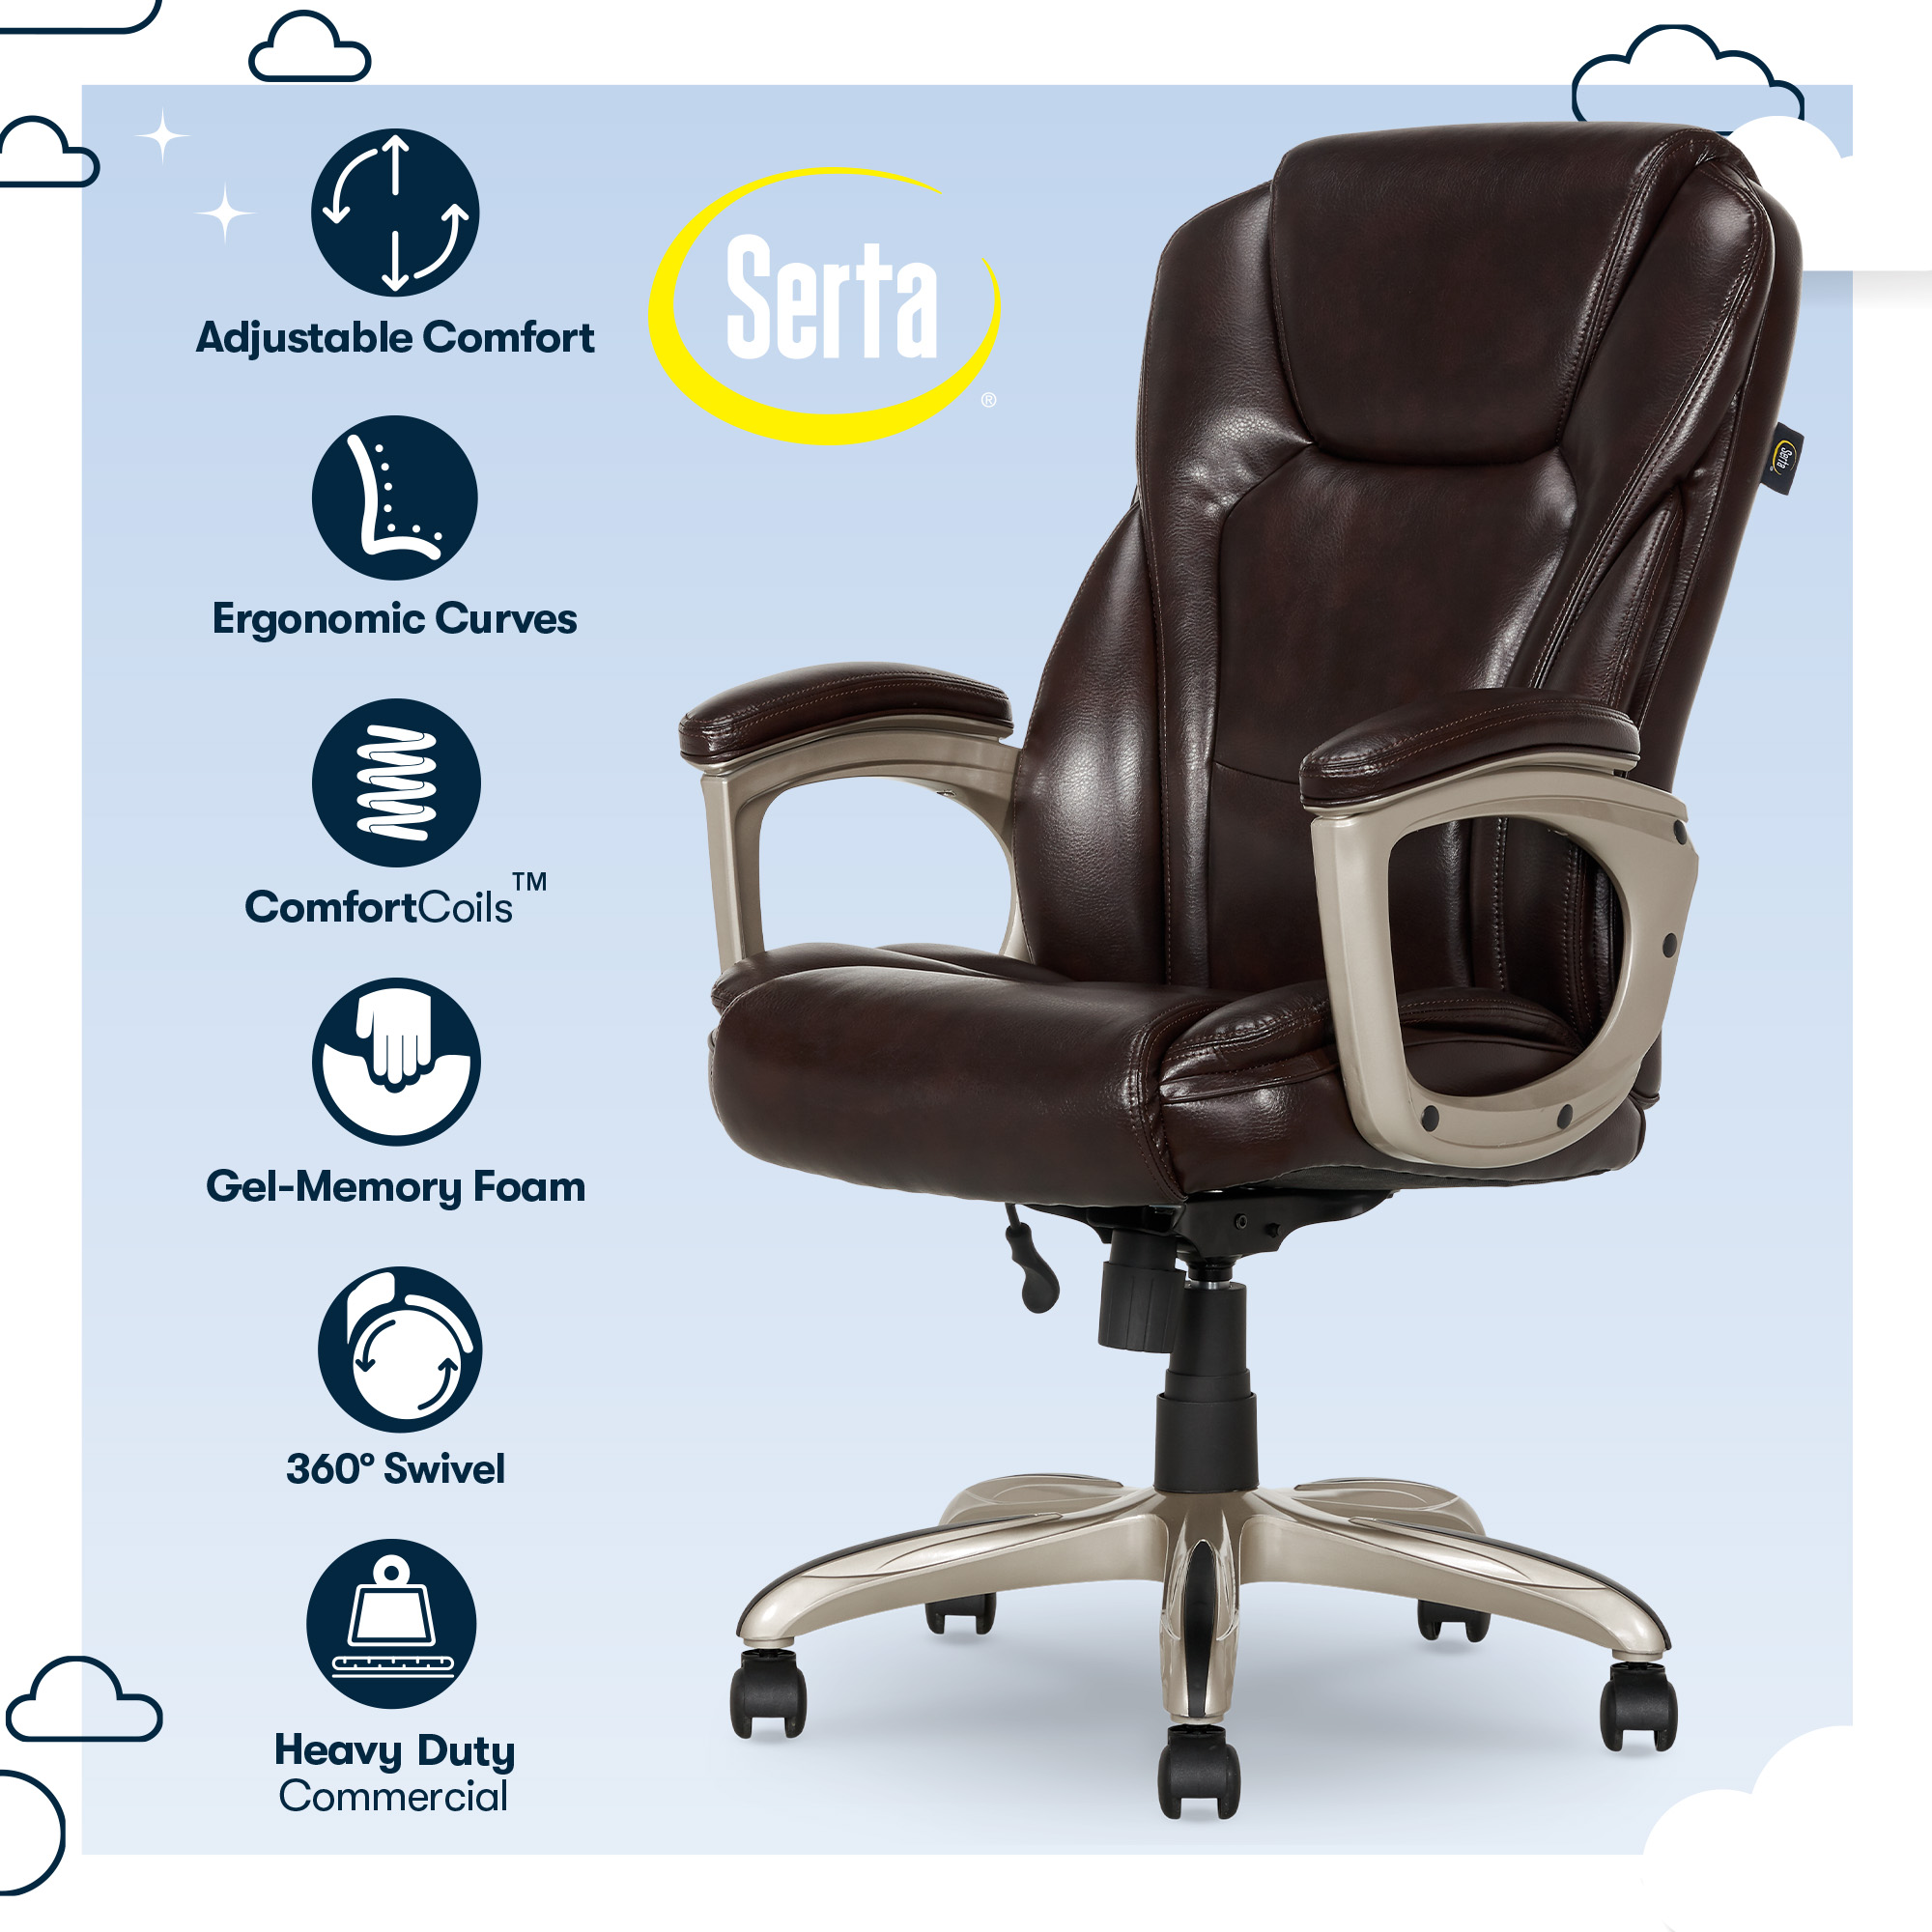 Serta Heavy-Duty Bonded Leather Commercial Office Chair with Memory Foam, 350 lb capacity, Brown - image 3 of 8